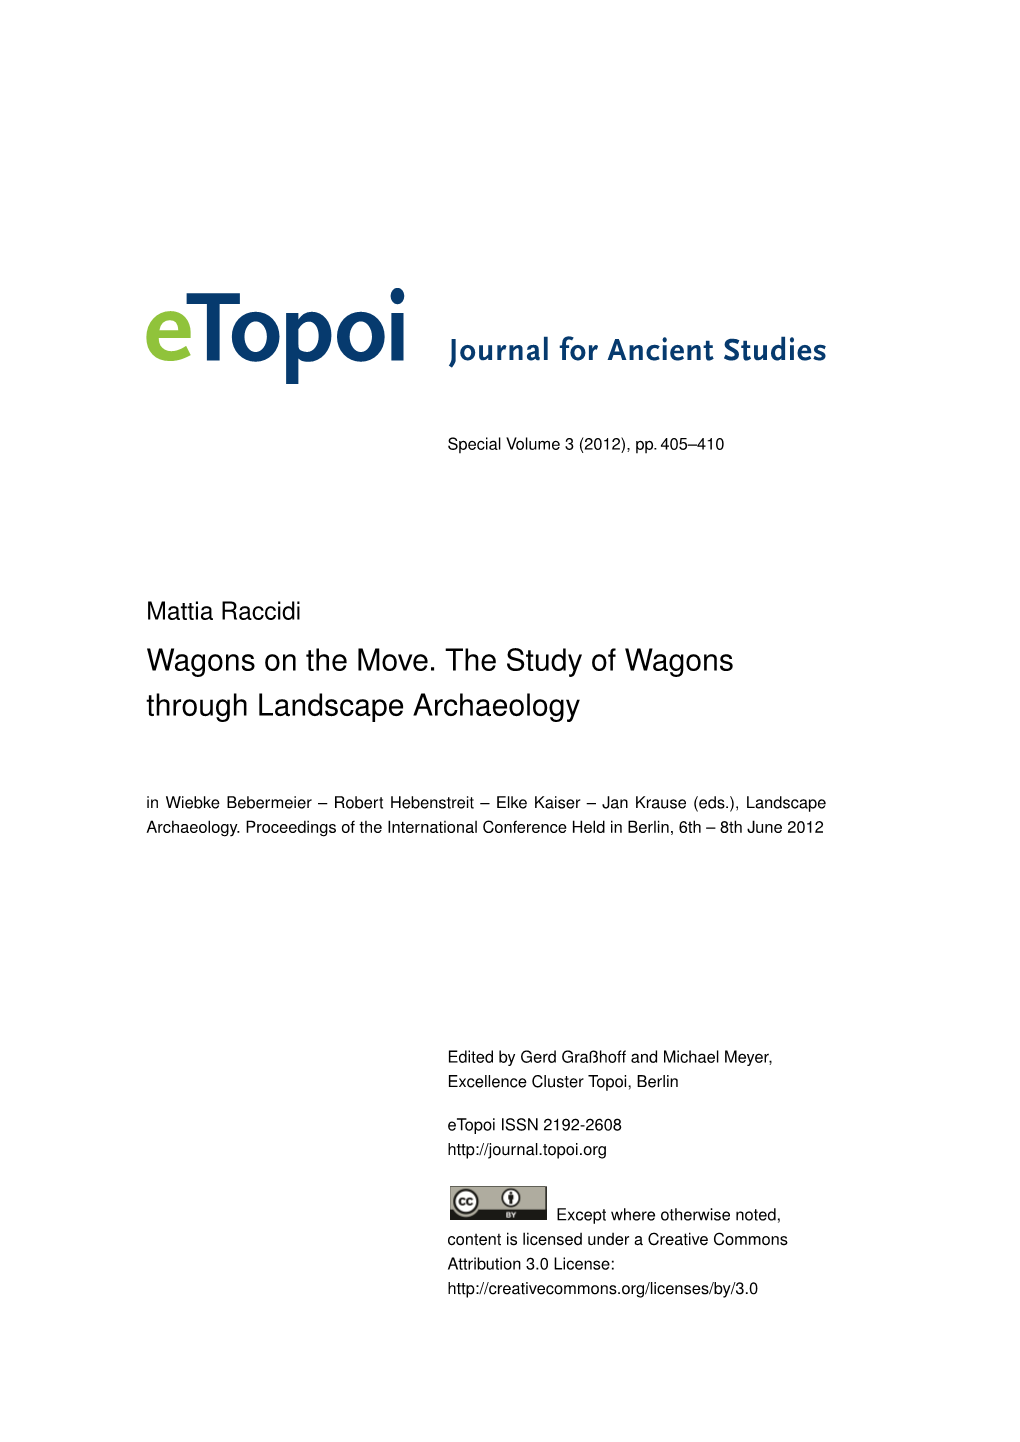 Wagons on the Move. the Study of Wagons Through Landscape Archaeology